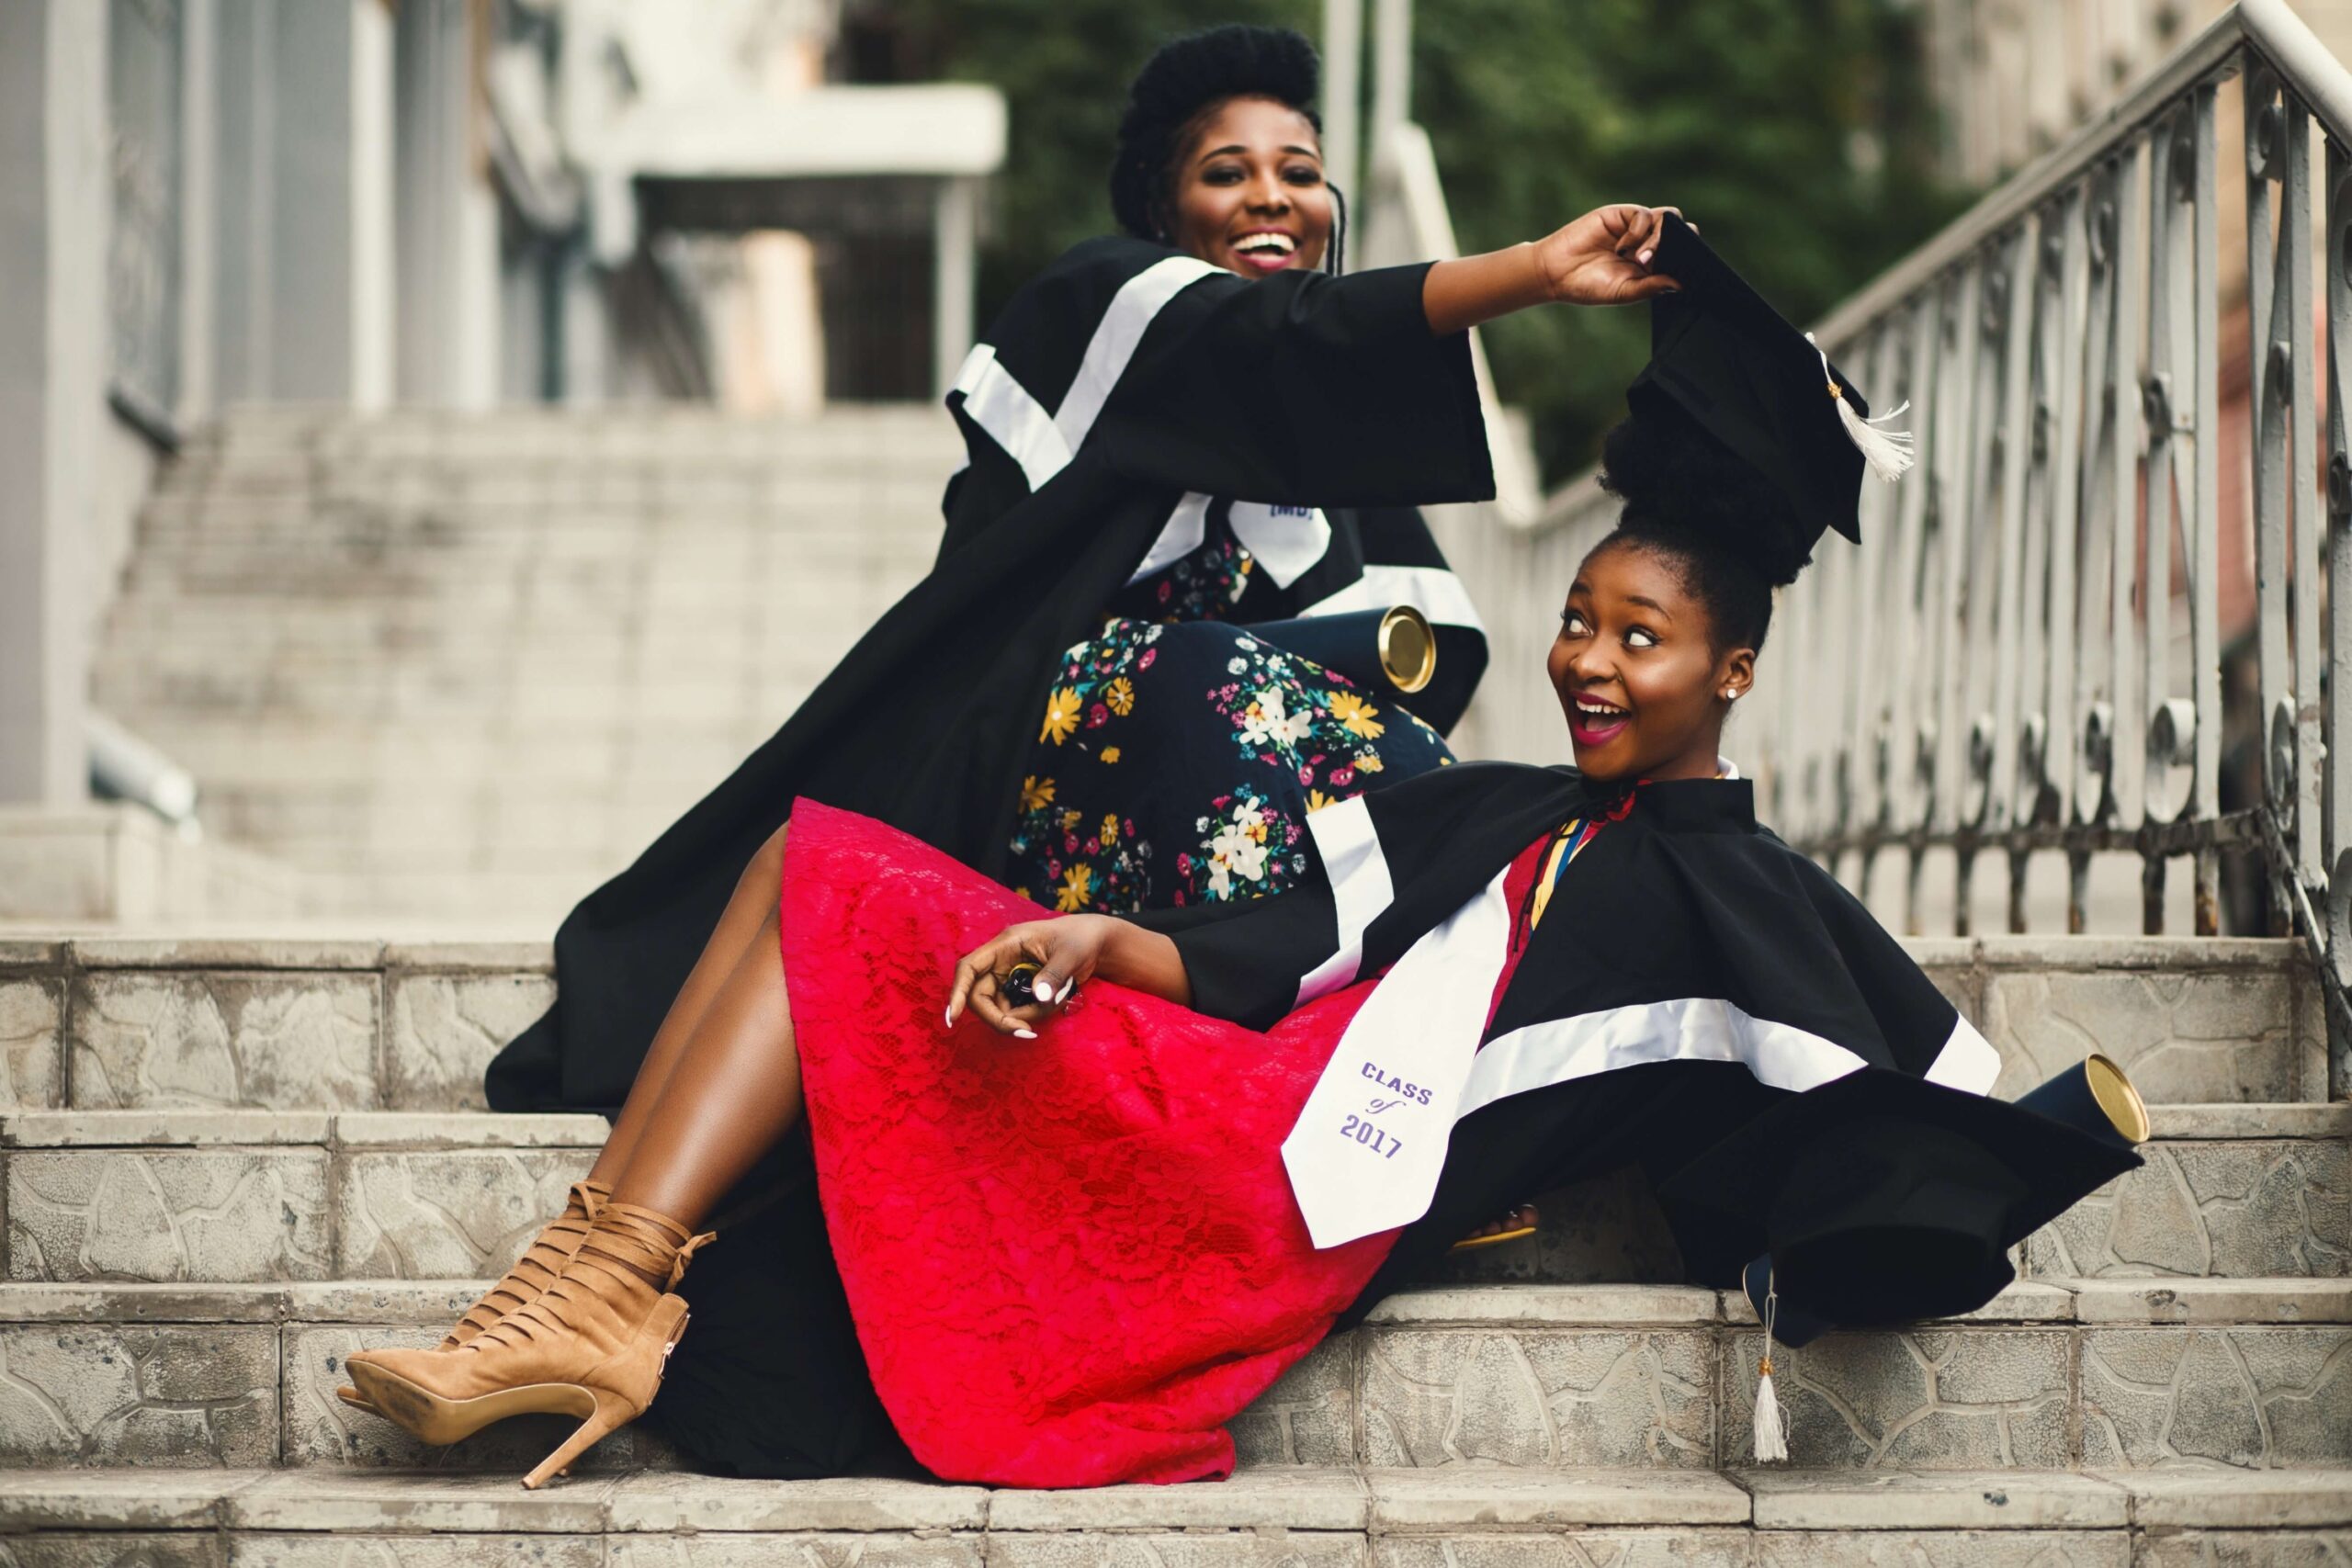 Two Black students wearing graduation gowns smile as one pulls a graduation cap off the other.